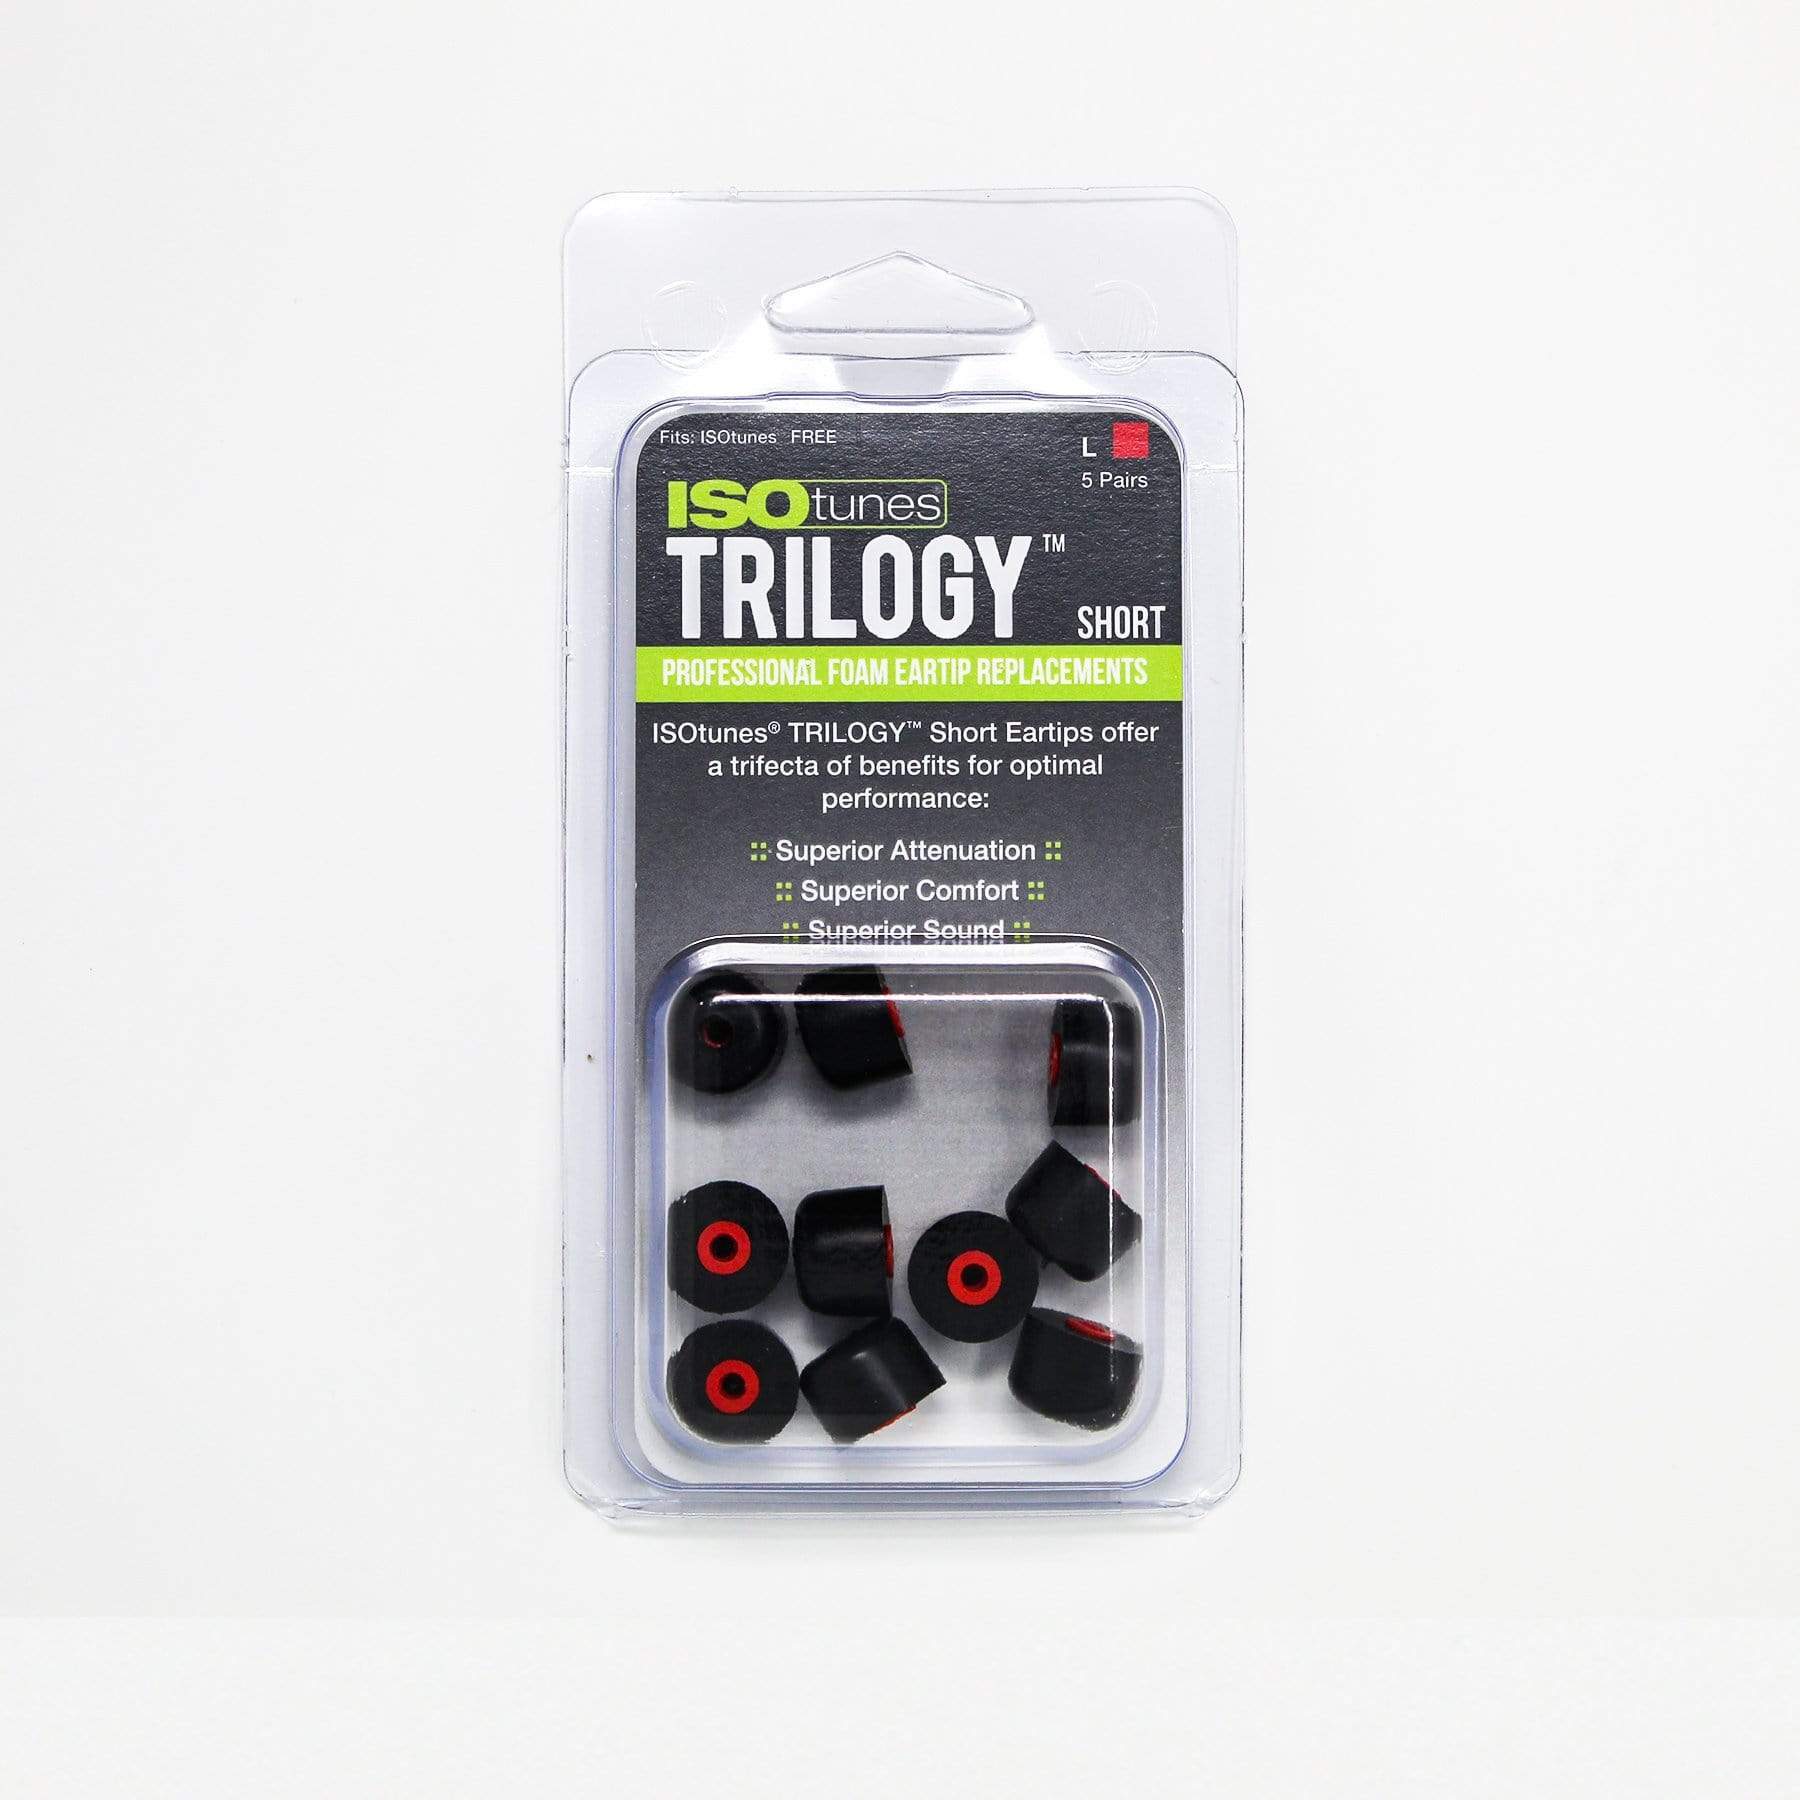 ISOtunes.co.uk Short TRILOGY™ Foam Replacement Eartips for ISOtunes FREE  (5 Pair Pack)